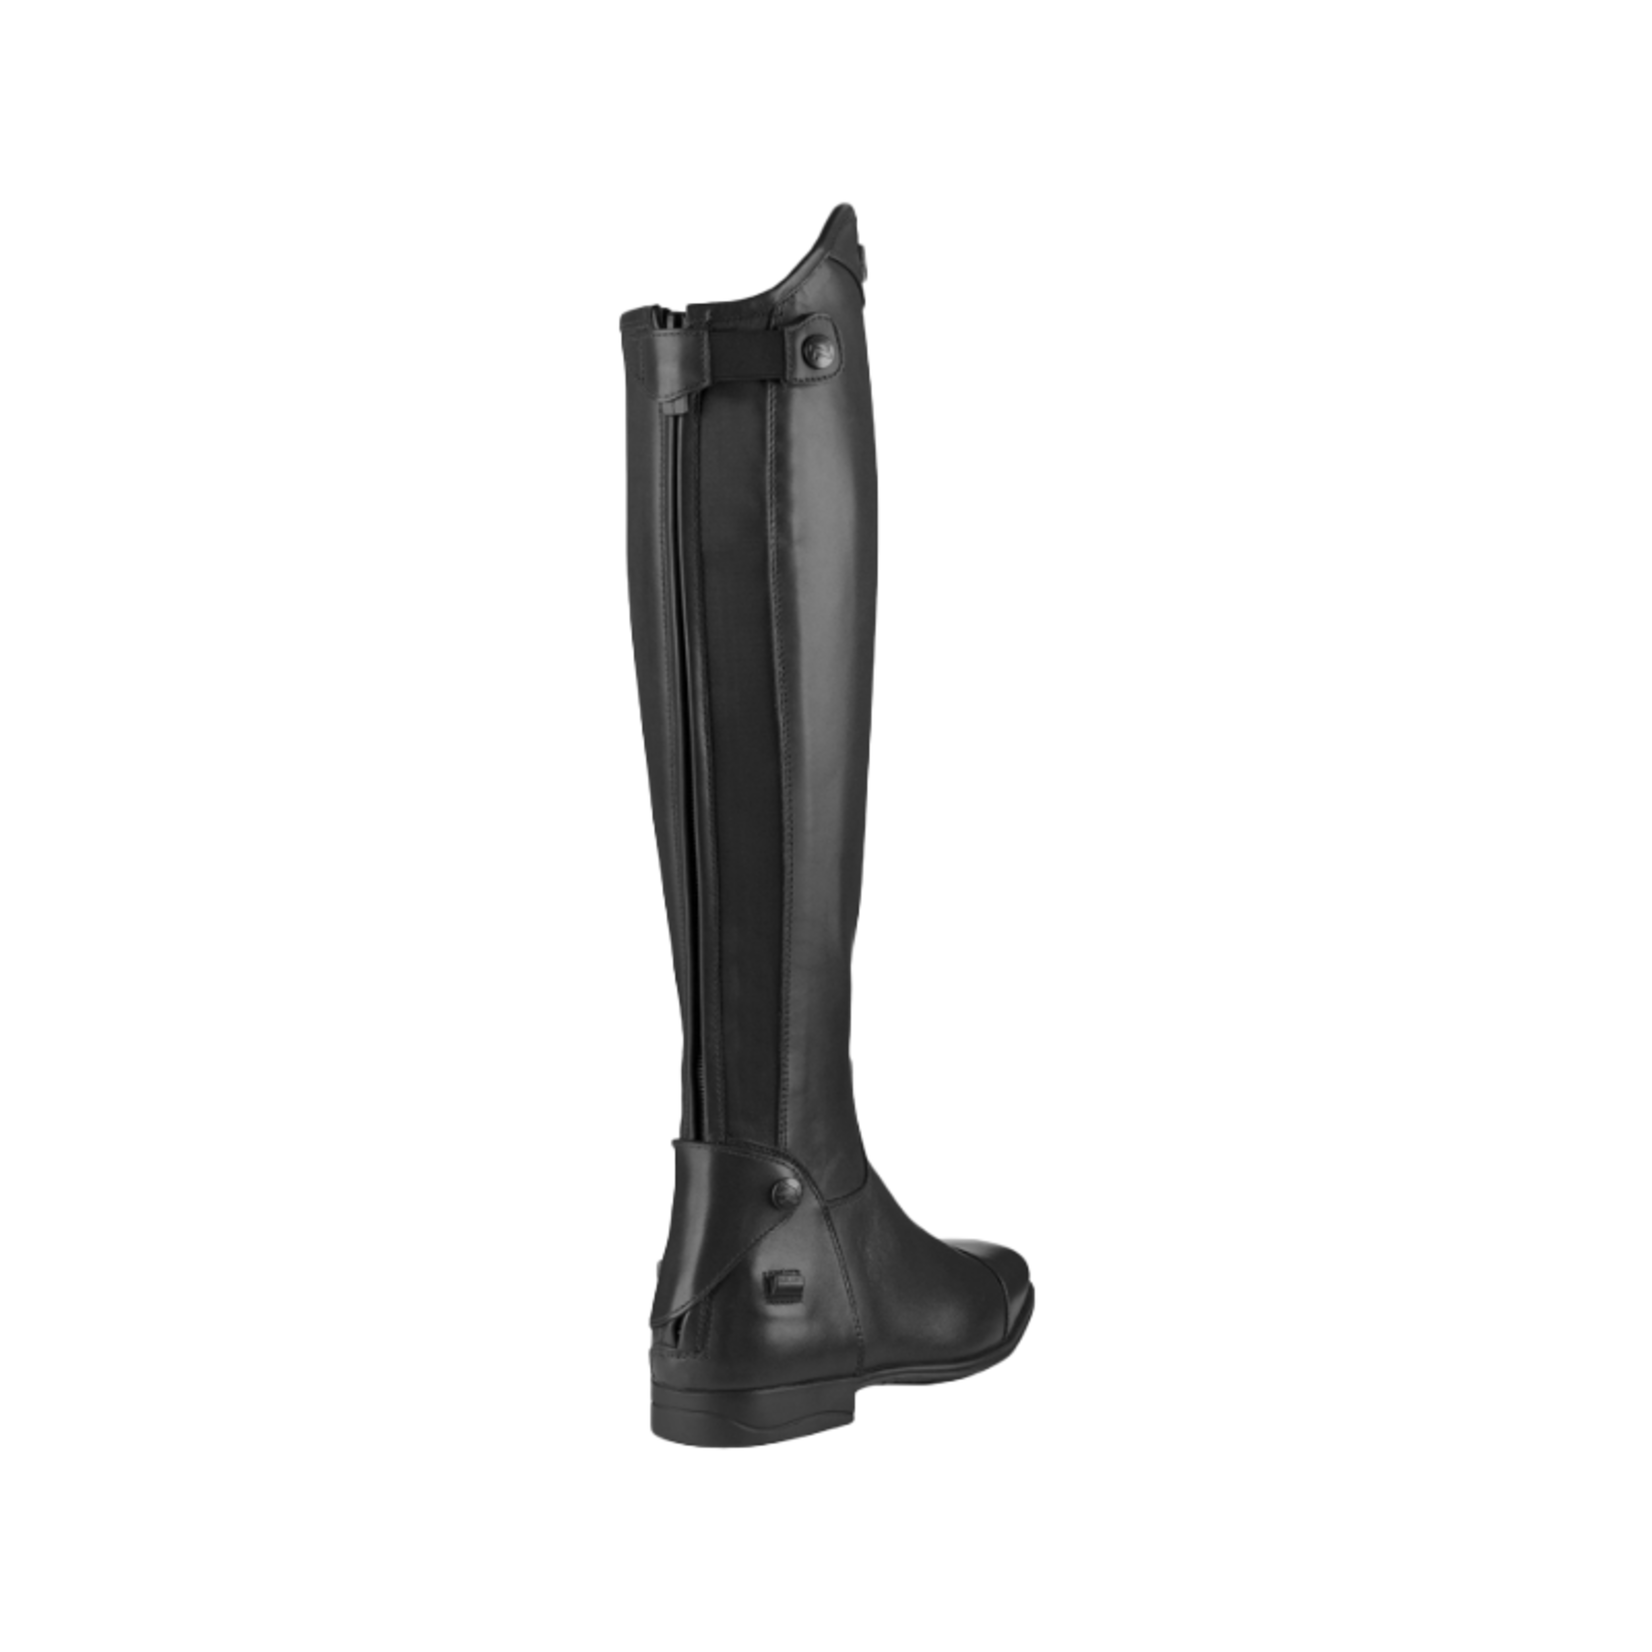 Parlanti Parlanti Denver Dress Tall Boots. Handcrafted from premium italian calfskin leather. Equipped with elastic panels designed for added comfort, feel and profiled fit.